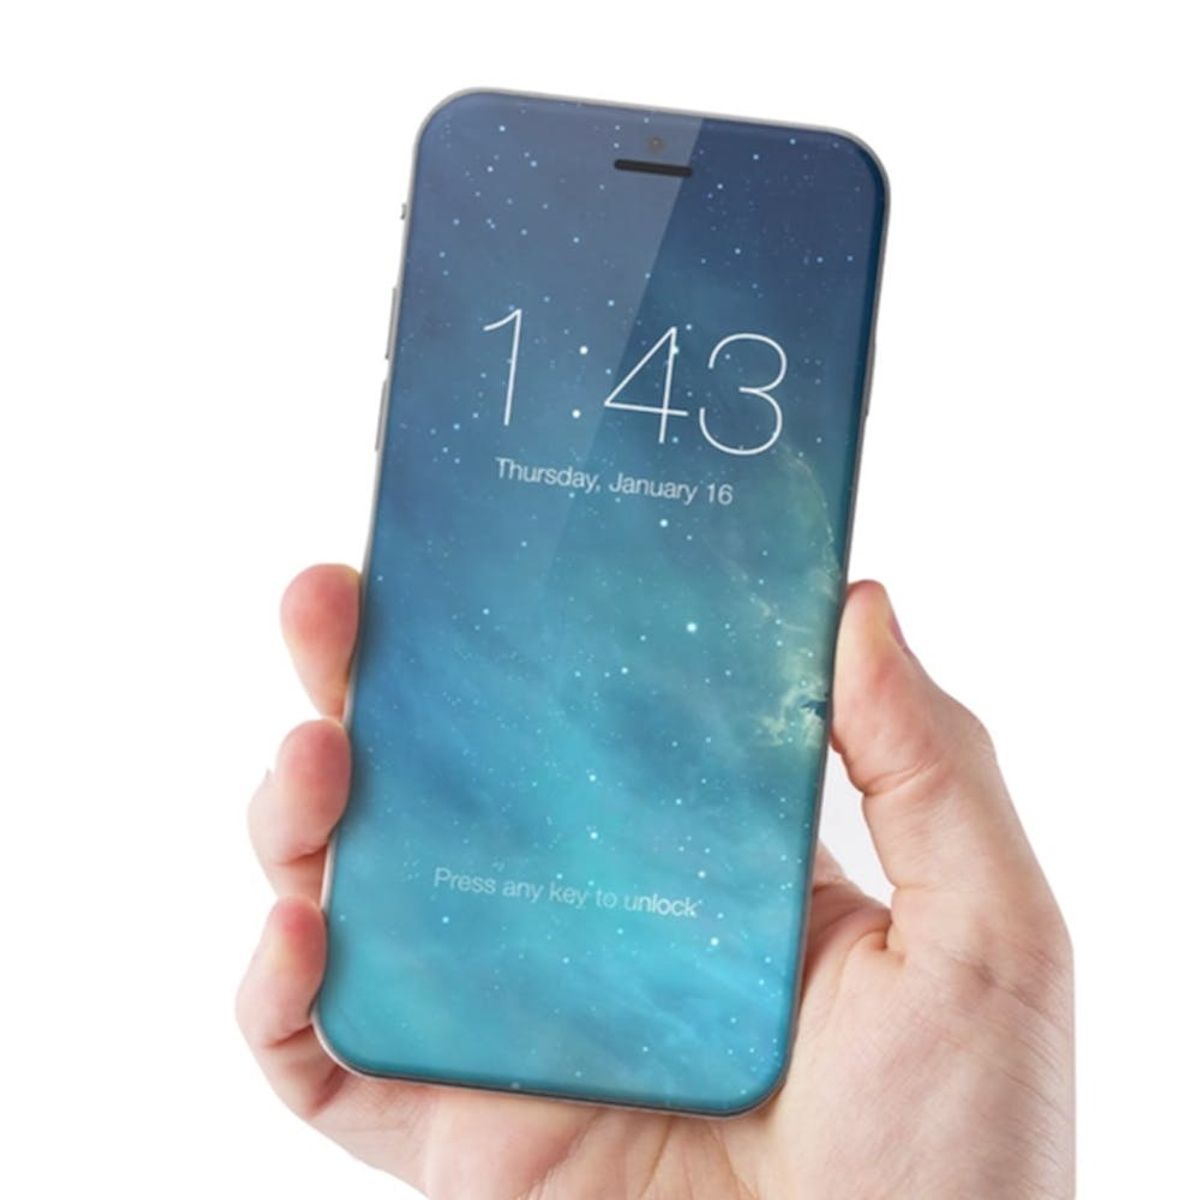 These New iPhone 7 Rumors Show a WHOLE New Phone